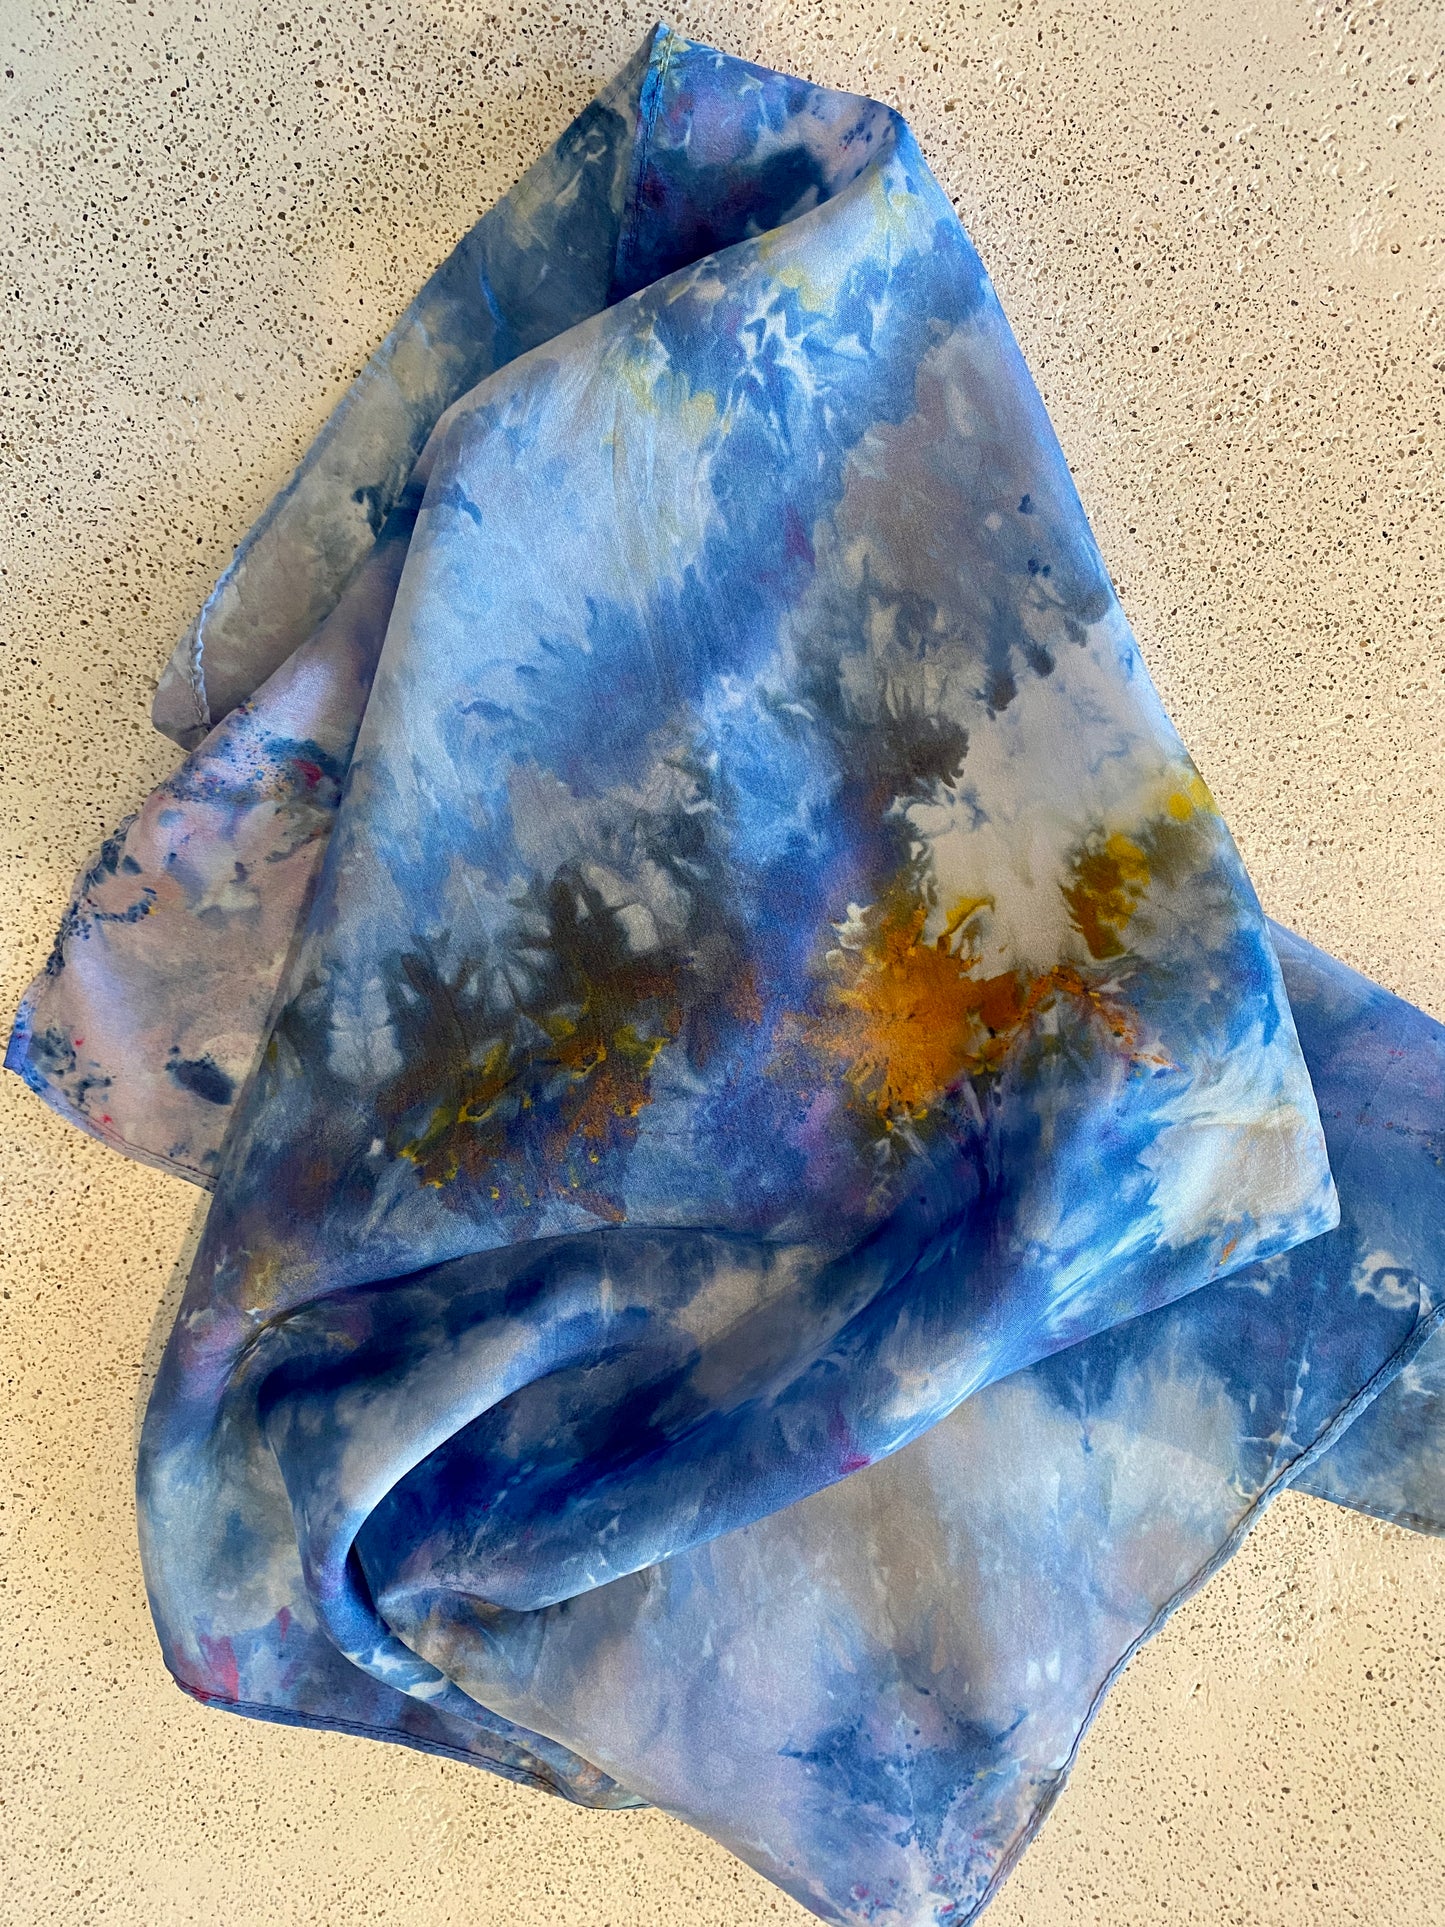 Pigment Agate Dyed Silk Bandana Scarf in Blues